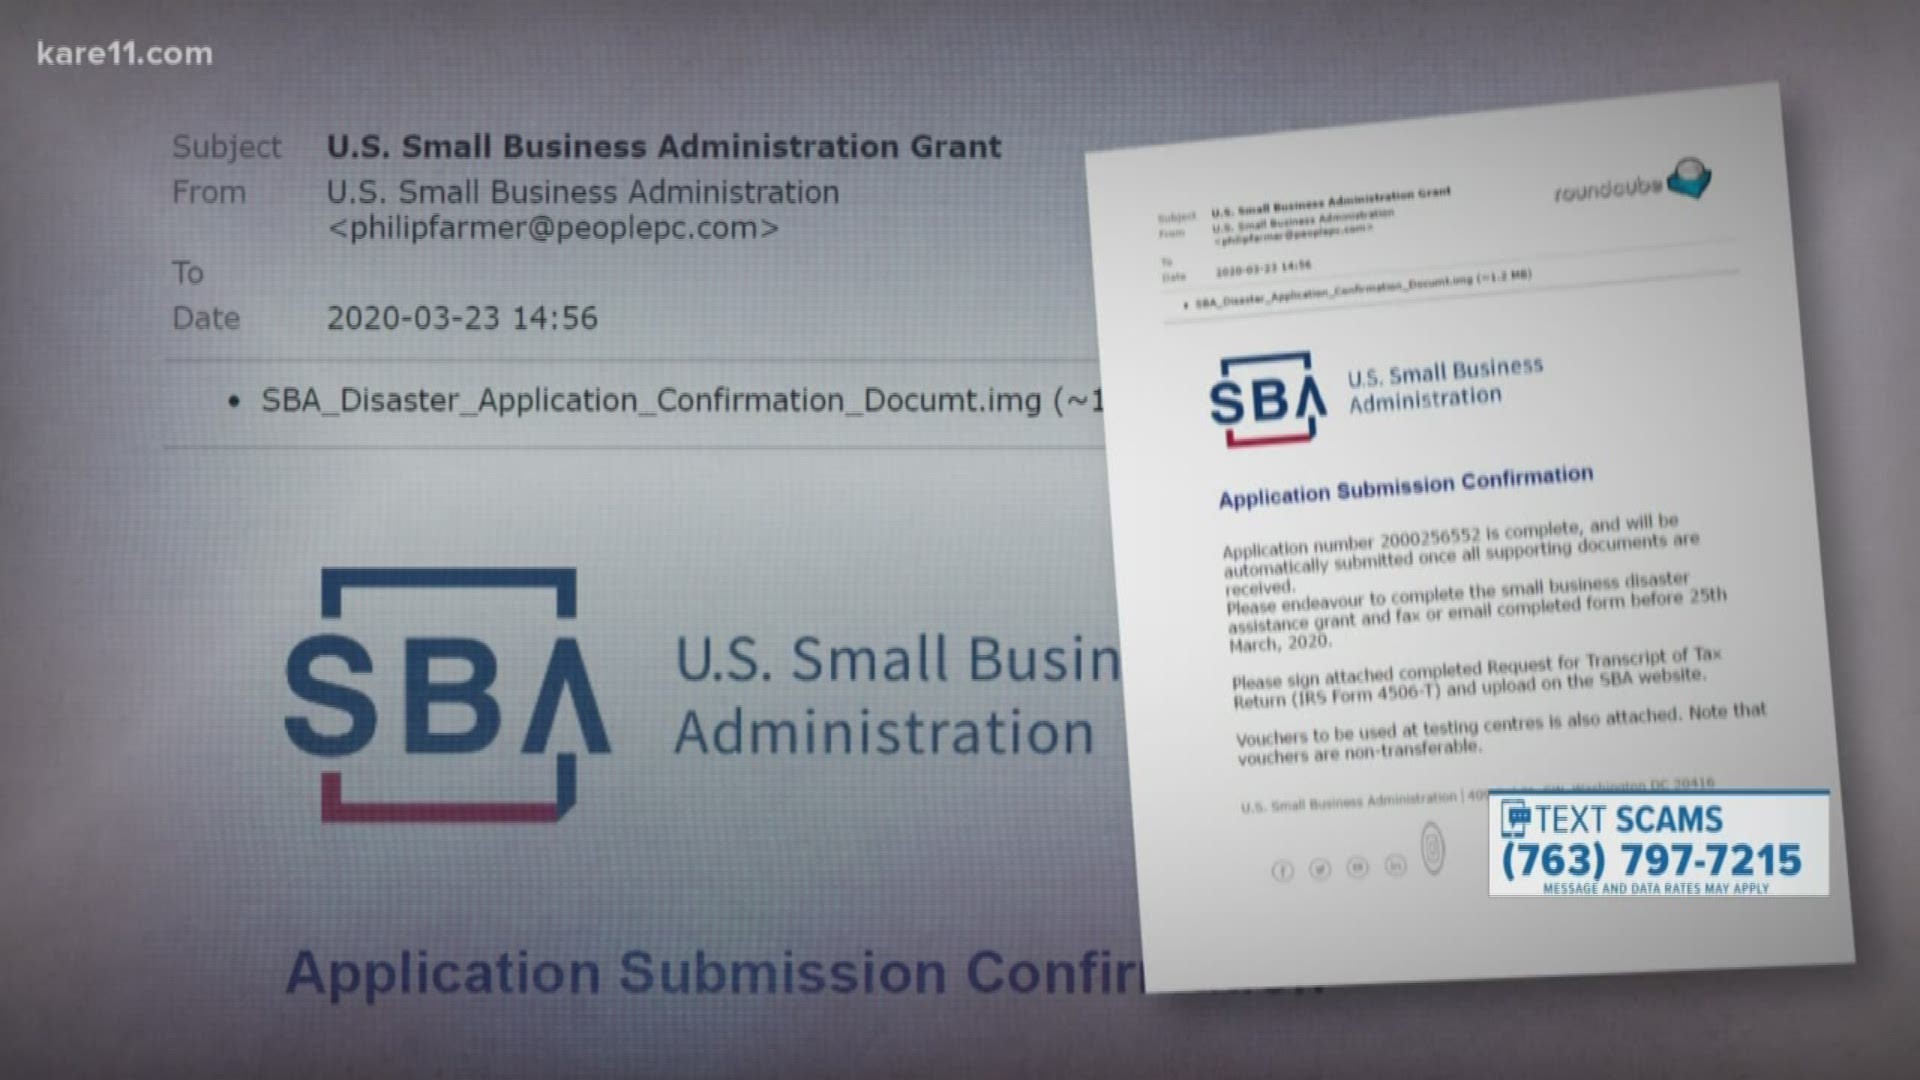 Real-looking emails about emergency loan applications claim to be from the Small Business Administration. They’re really a COVID-19 ‘phishing’ scam.